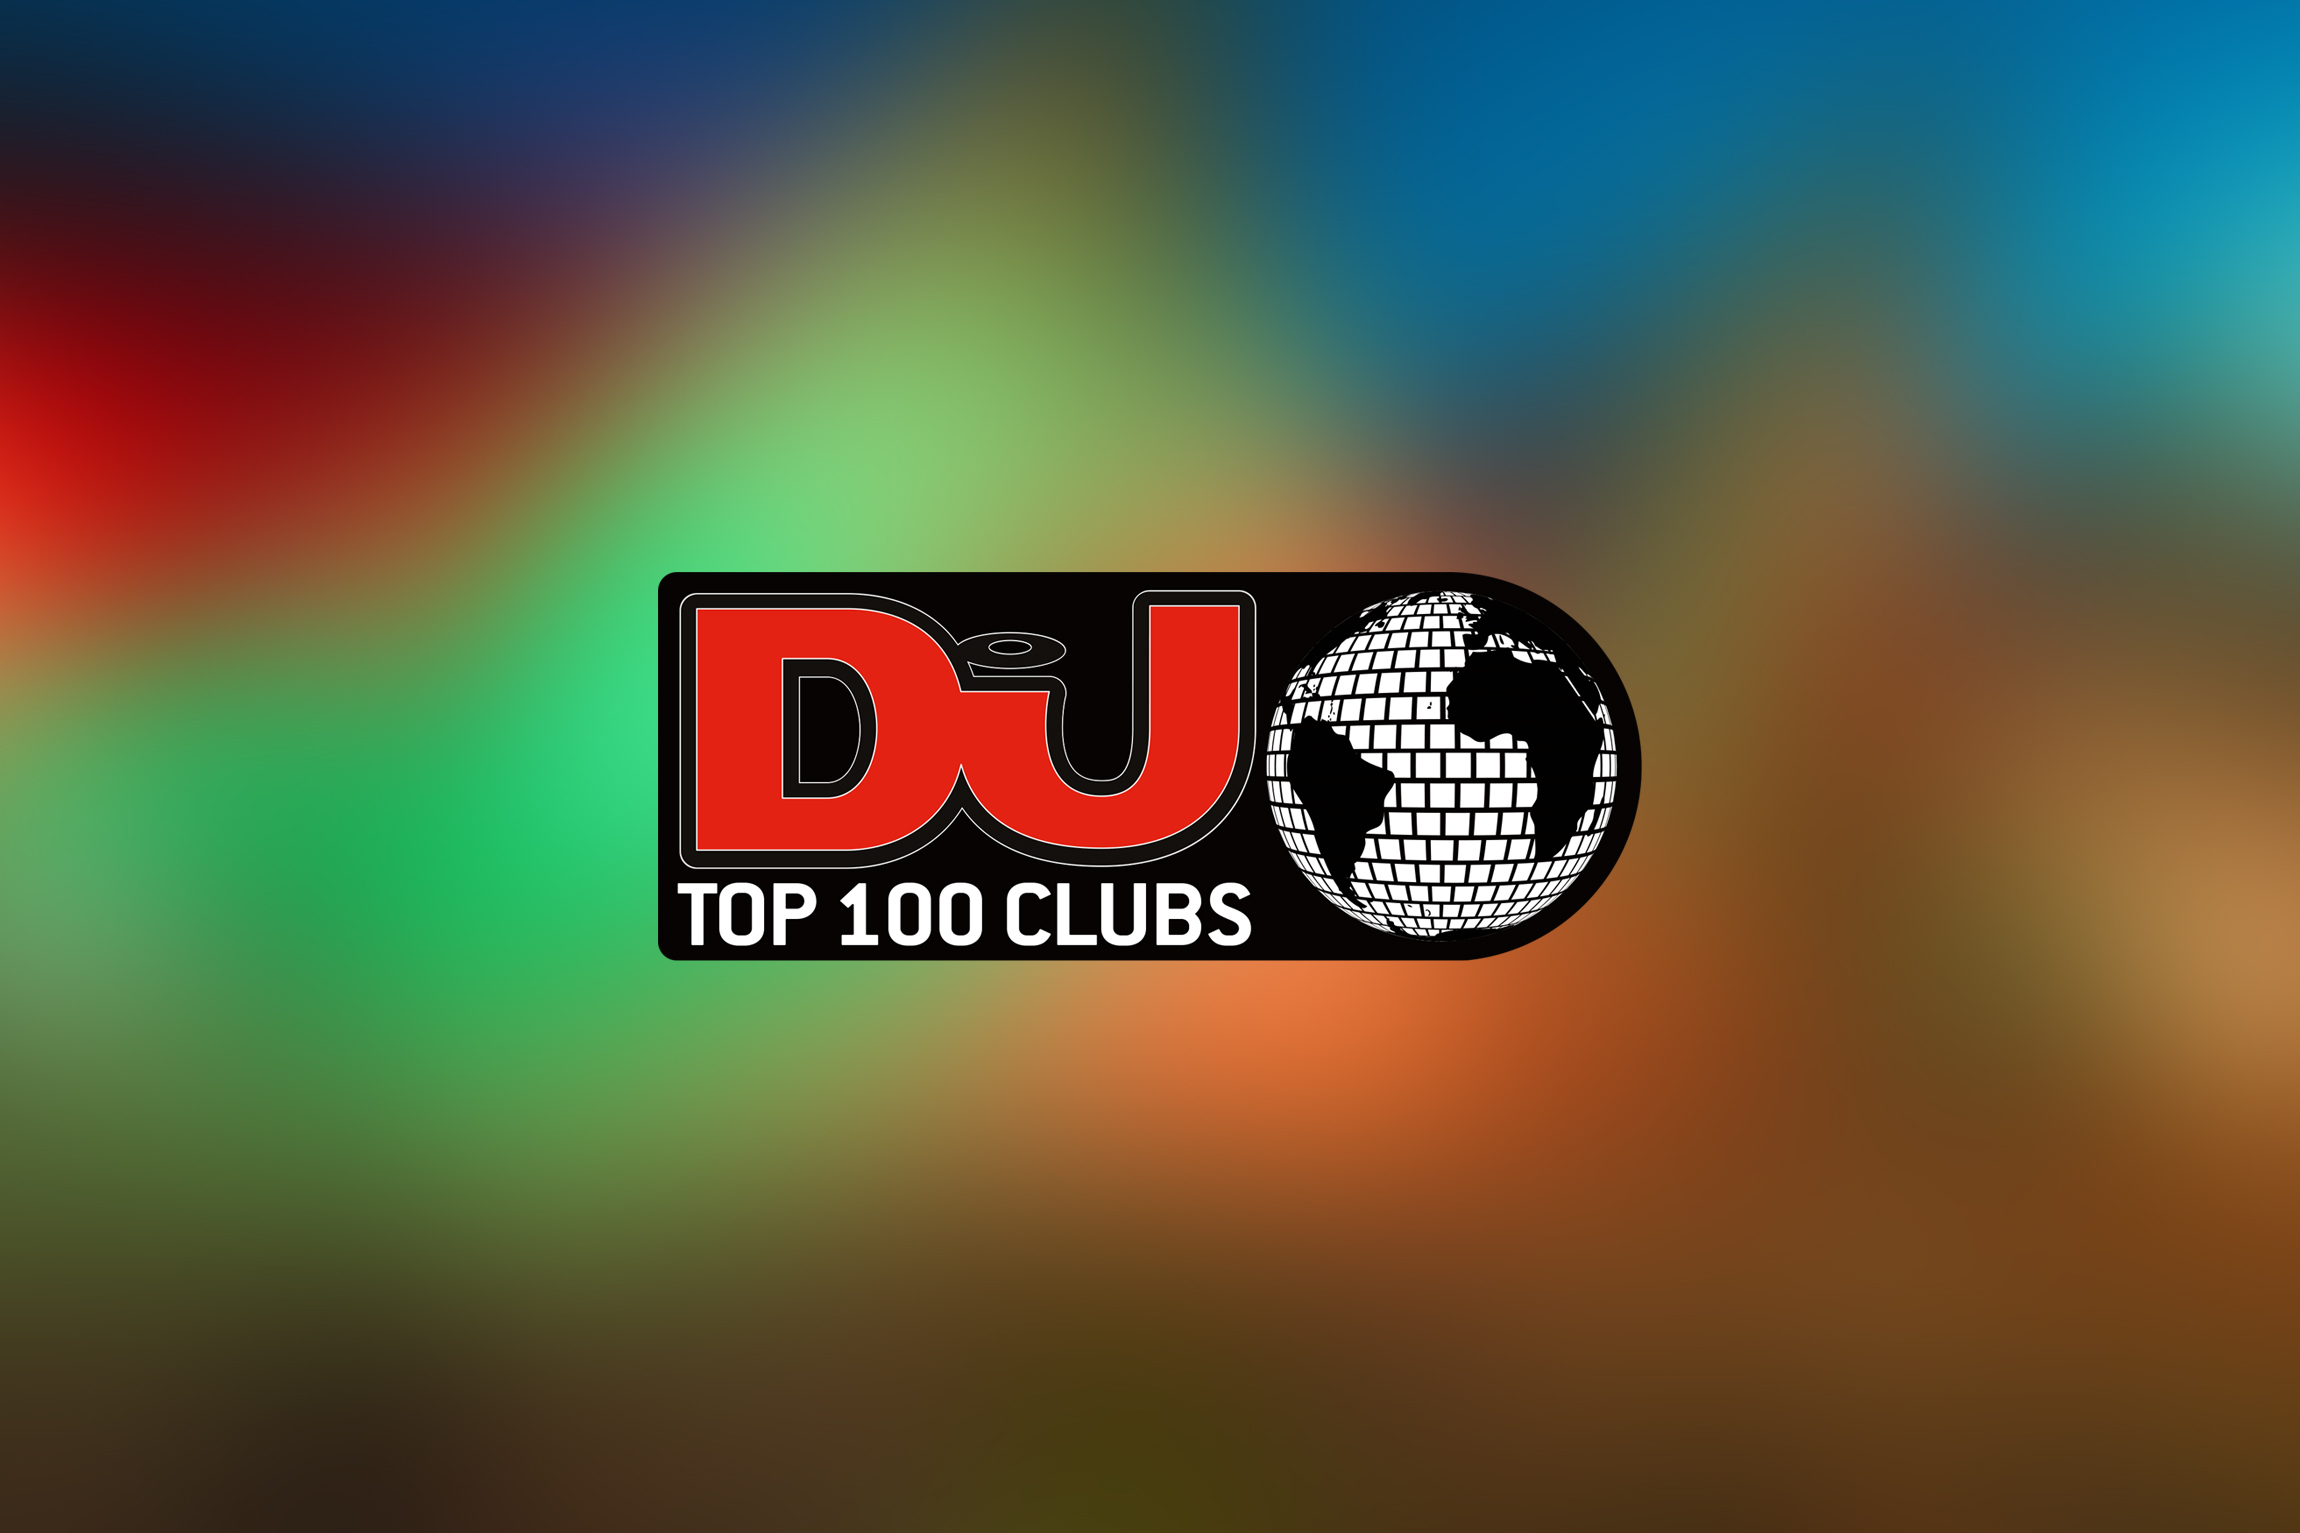 Echostage world's No.1 Club Top Clubs 2021 | Rave Jungle